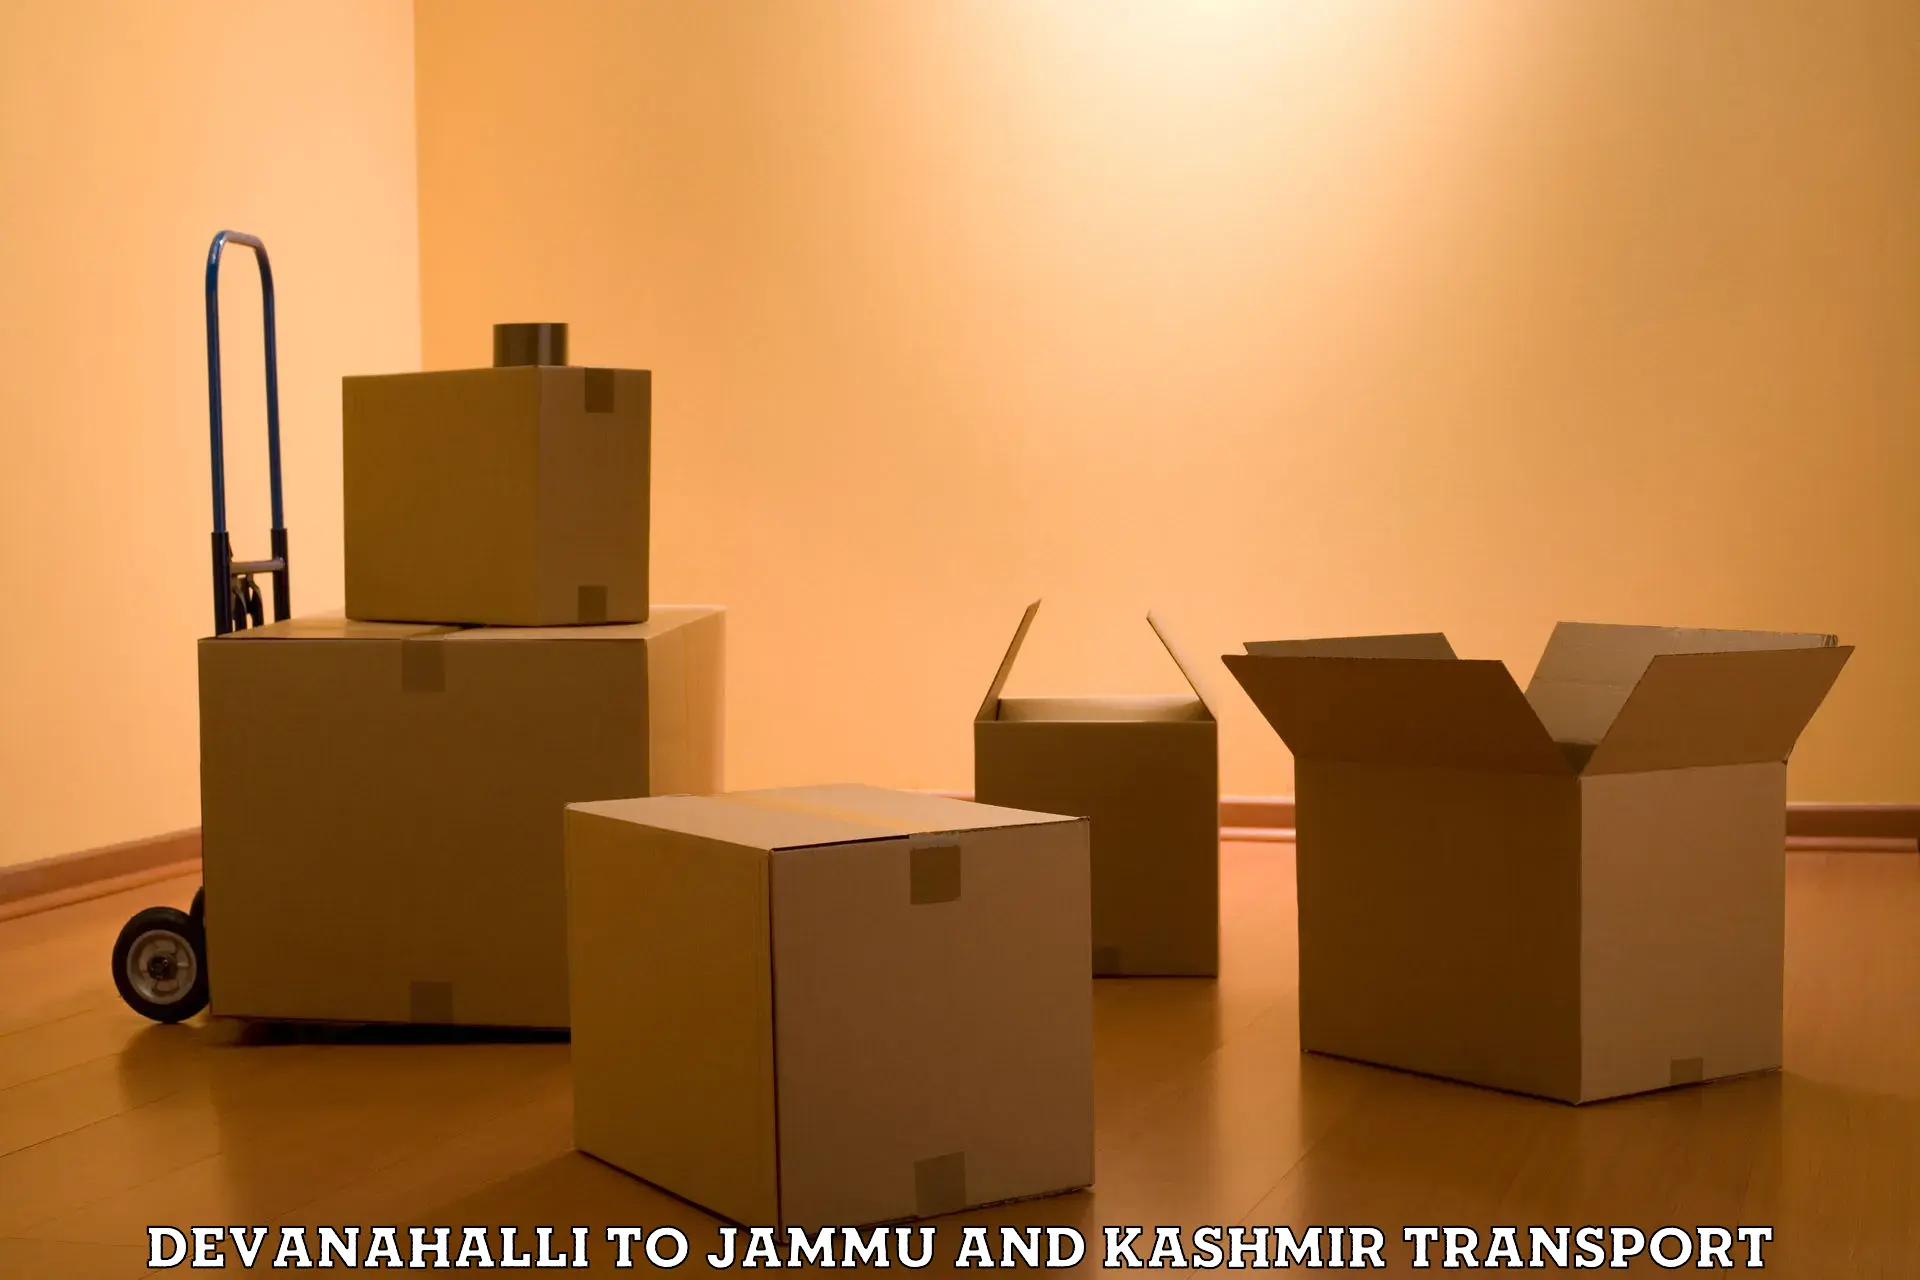 Daily parcel service transport in Devanahalli to Jammu and Kashmir